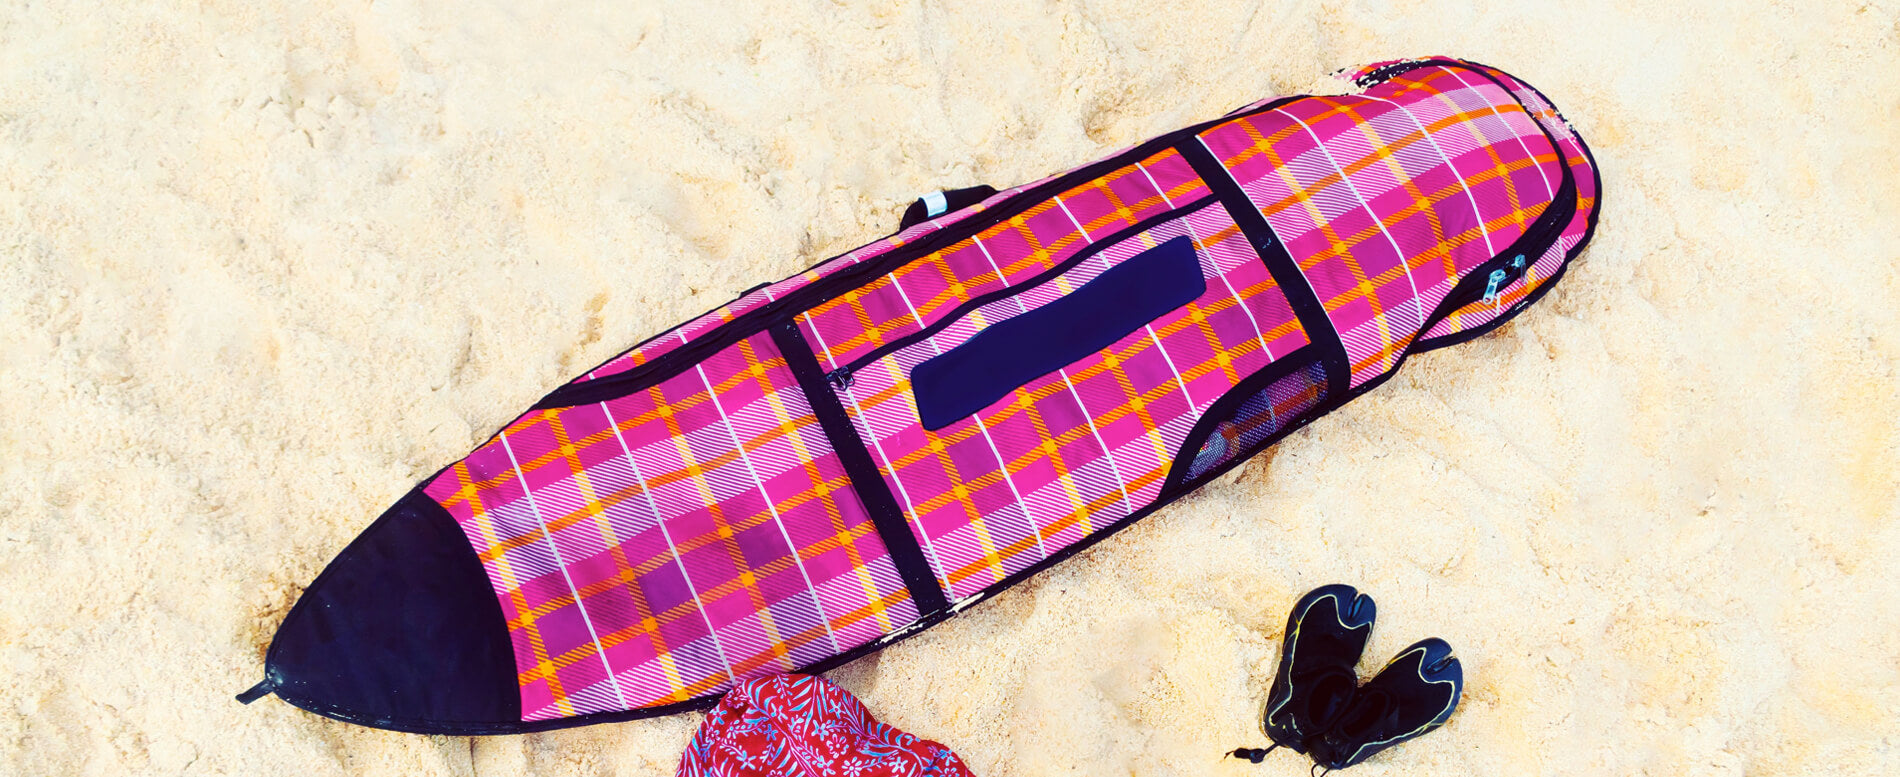 Pink surfboard bag on the beach